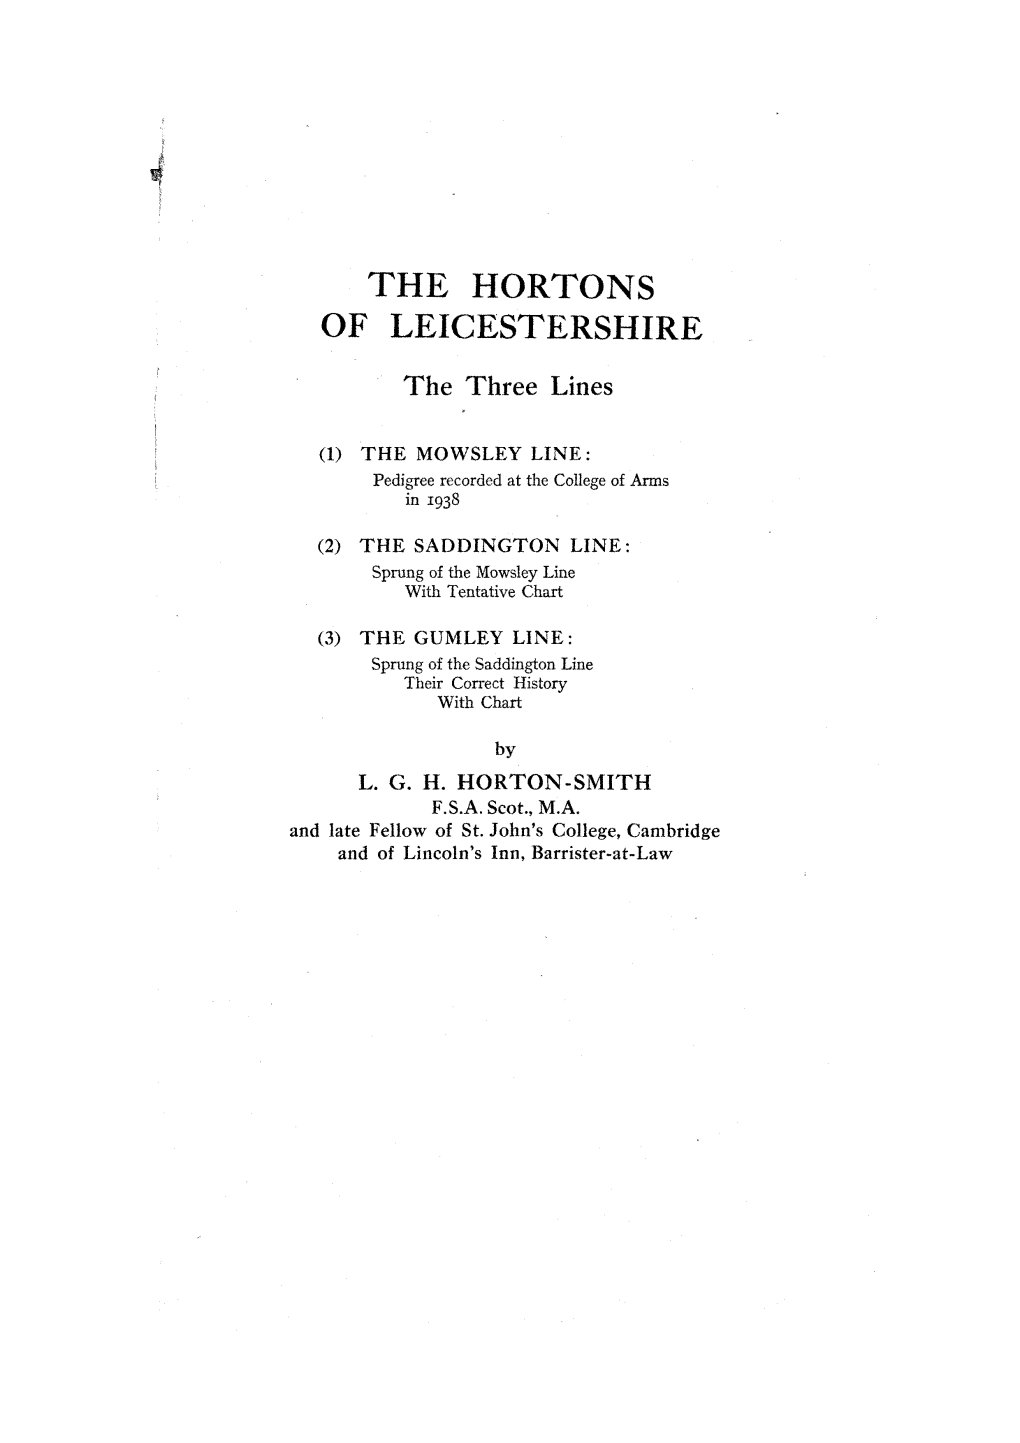 THE HORTONS of LEICESTERSHIRE the Three Lines